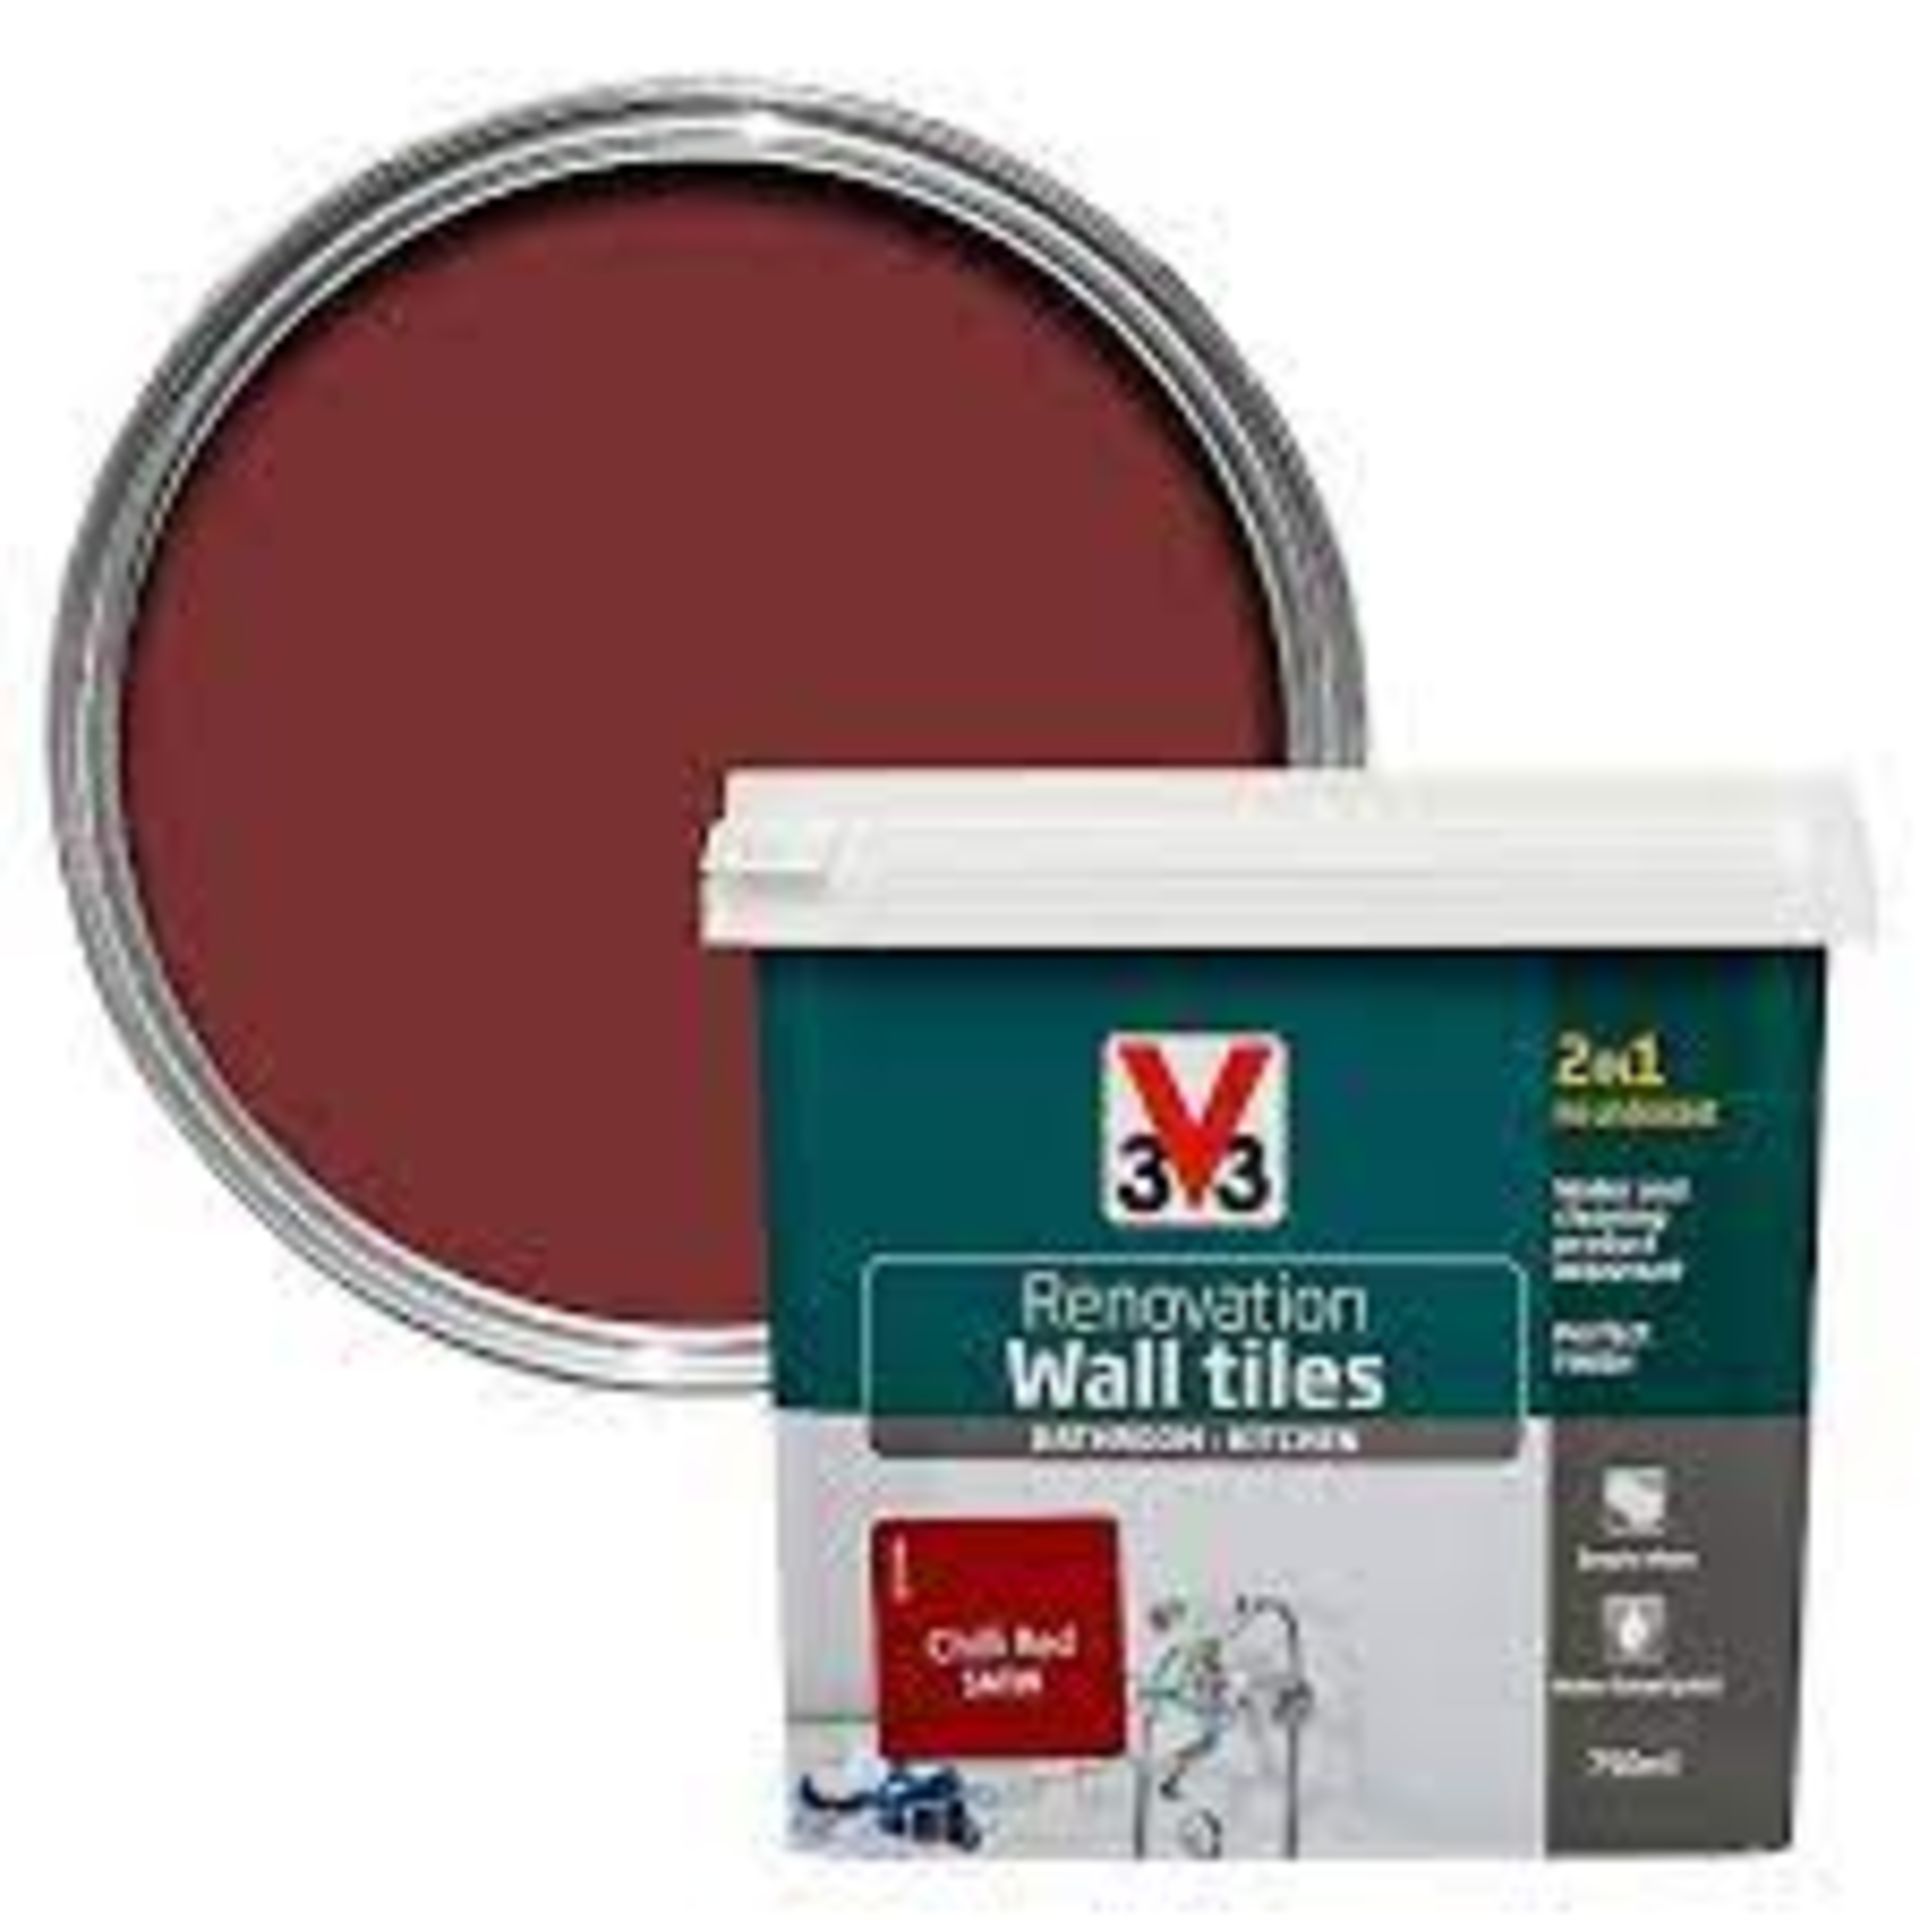 100 X NEW 750ML V33 CHILLI RED PAINT. RRP £9.99 PER TUB. (ROW6.1TOP)